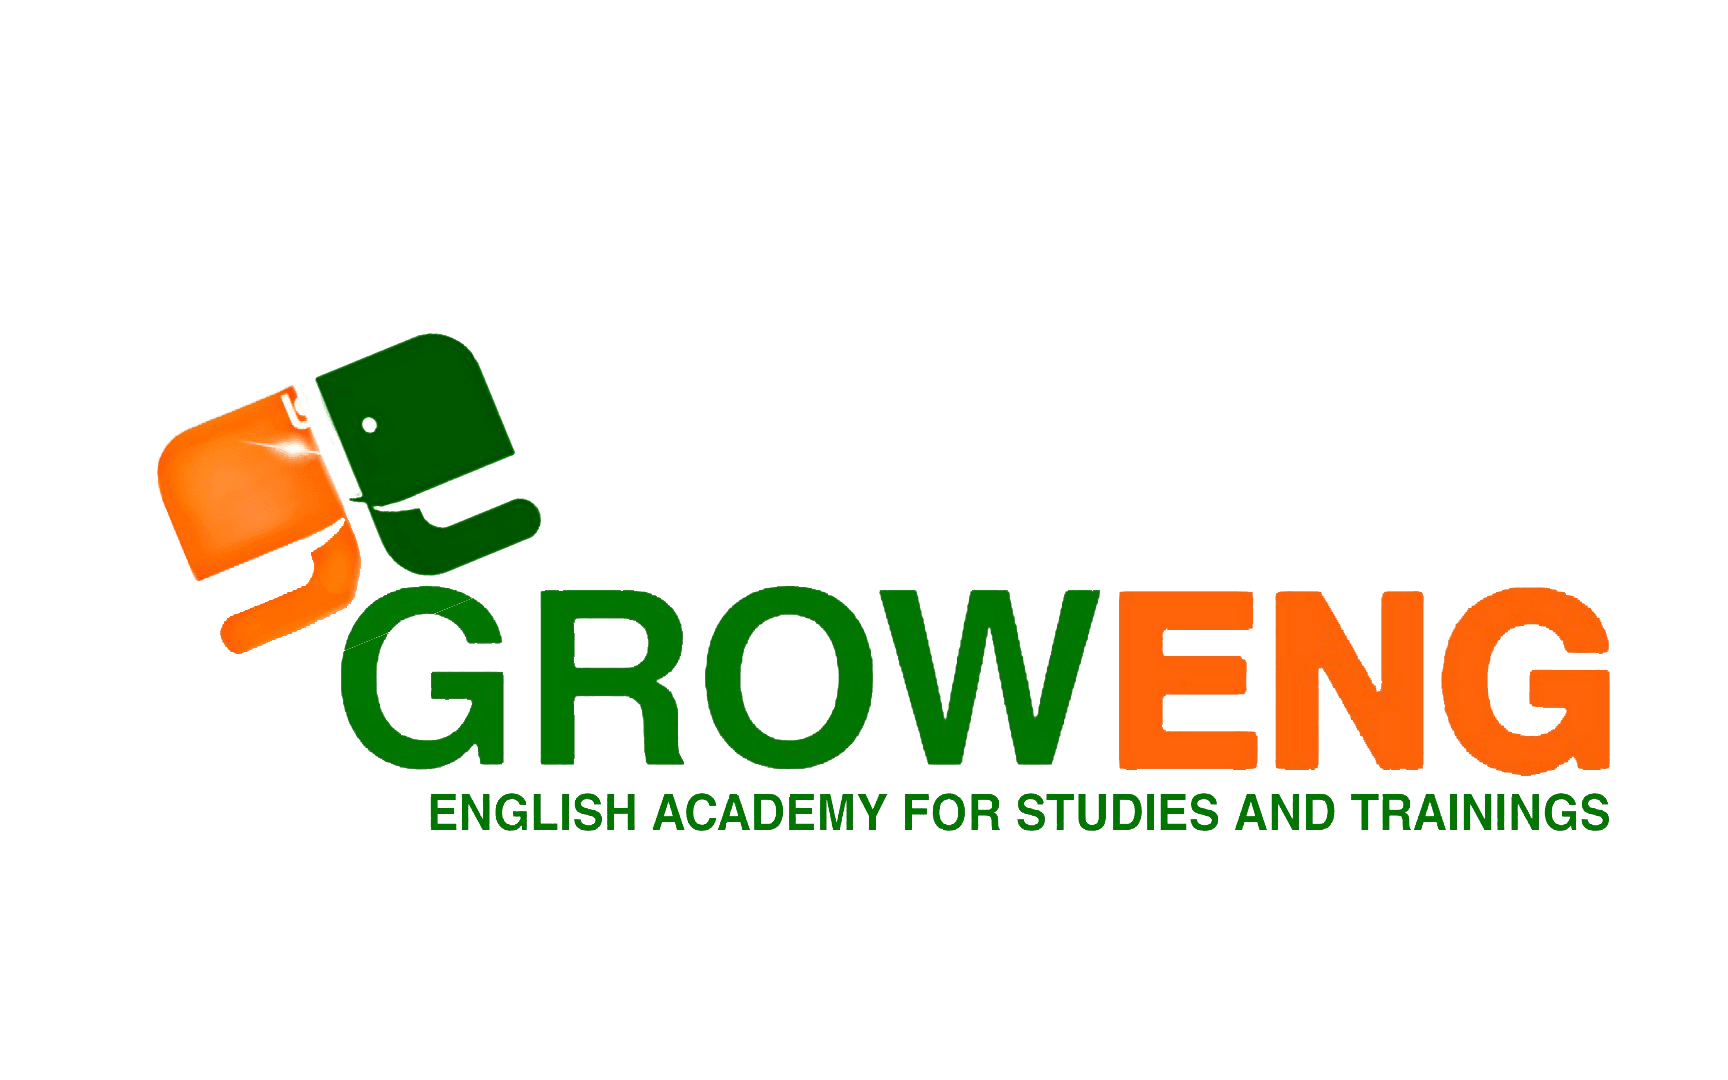 GrowENG Studies and Trainings